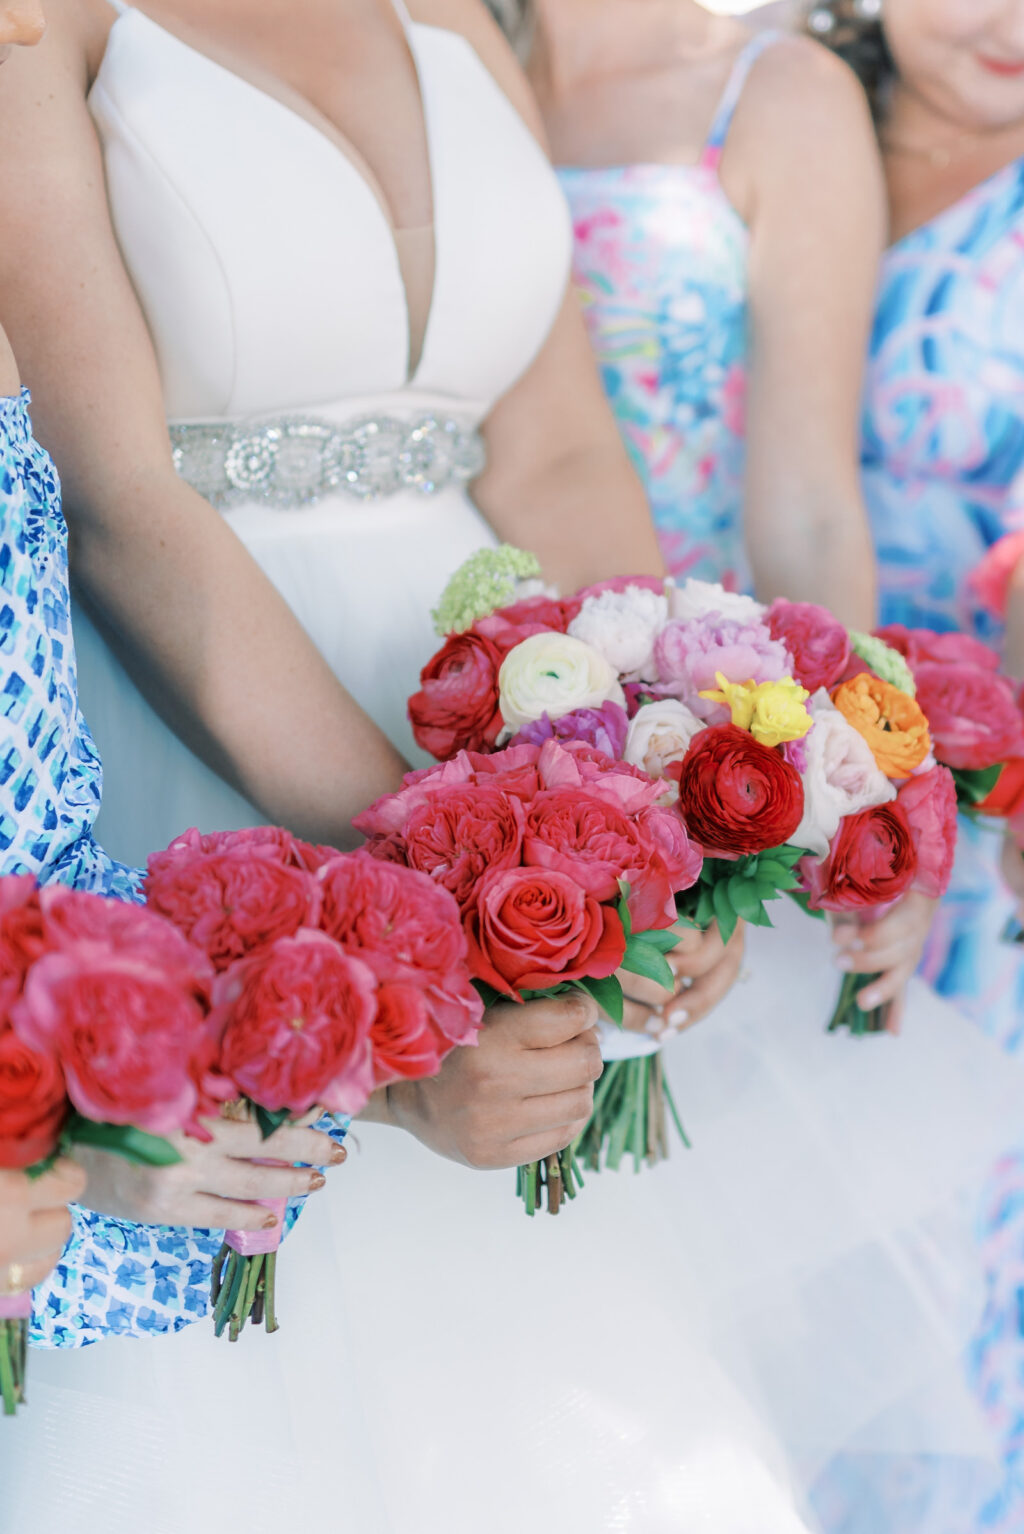 Bright and Vibrant Lilly Pulitzer Inspired Bridesmaids and Bridal Bouquet | Stella York Dress | Lilly Pulitzer